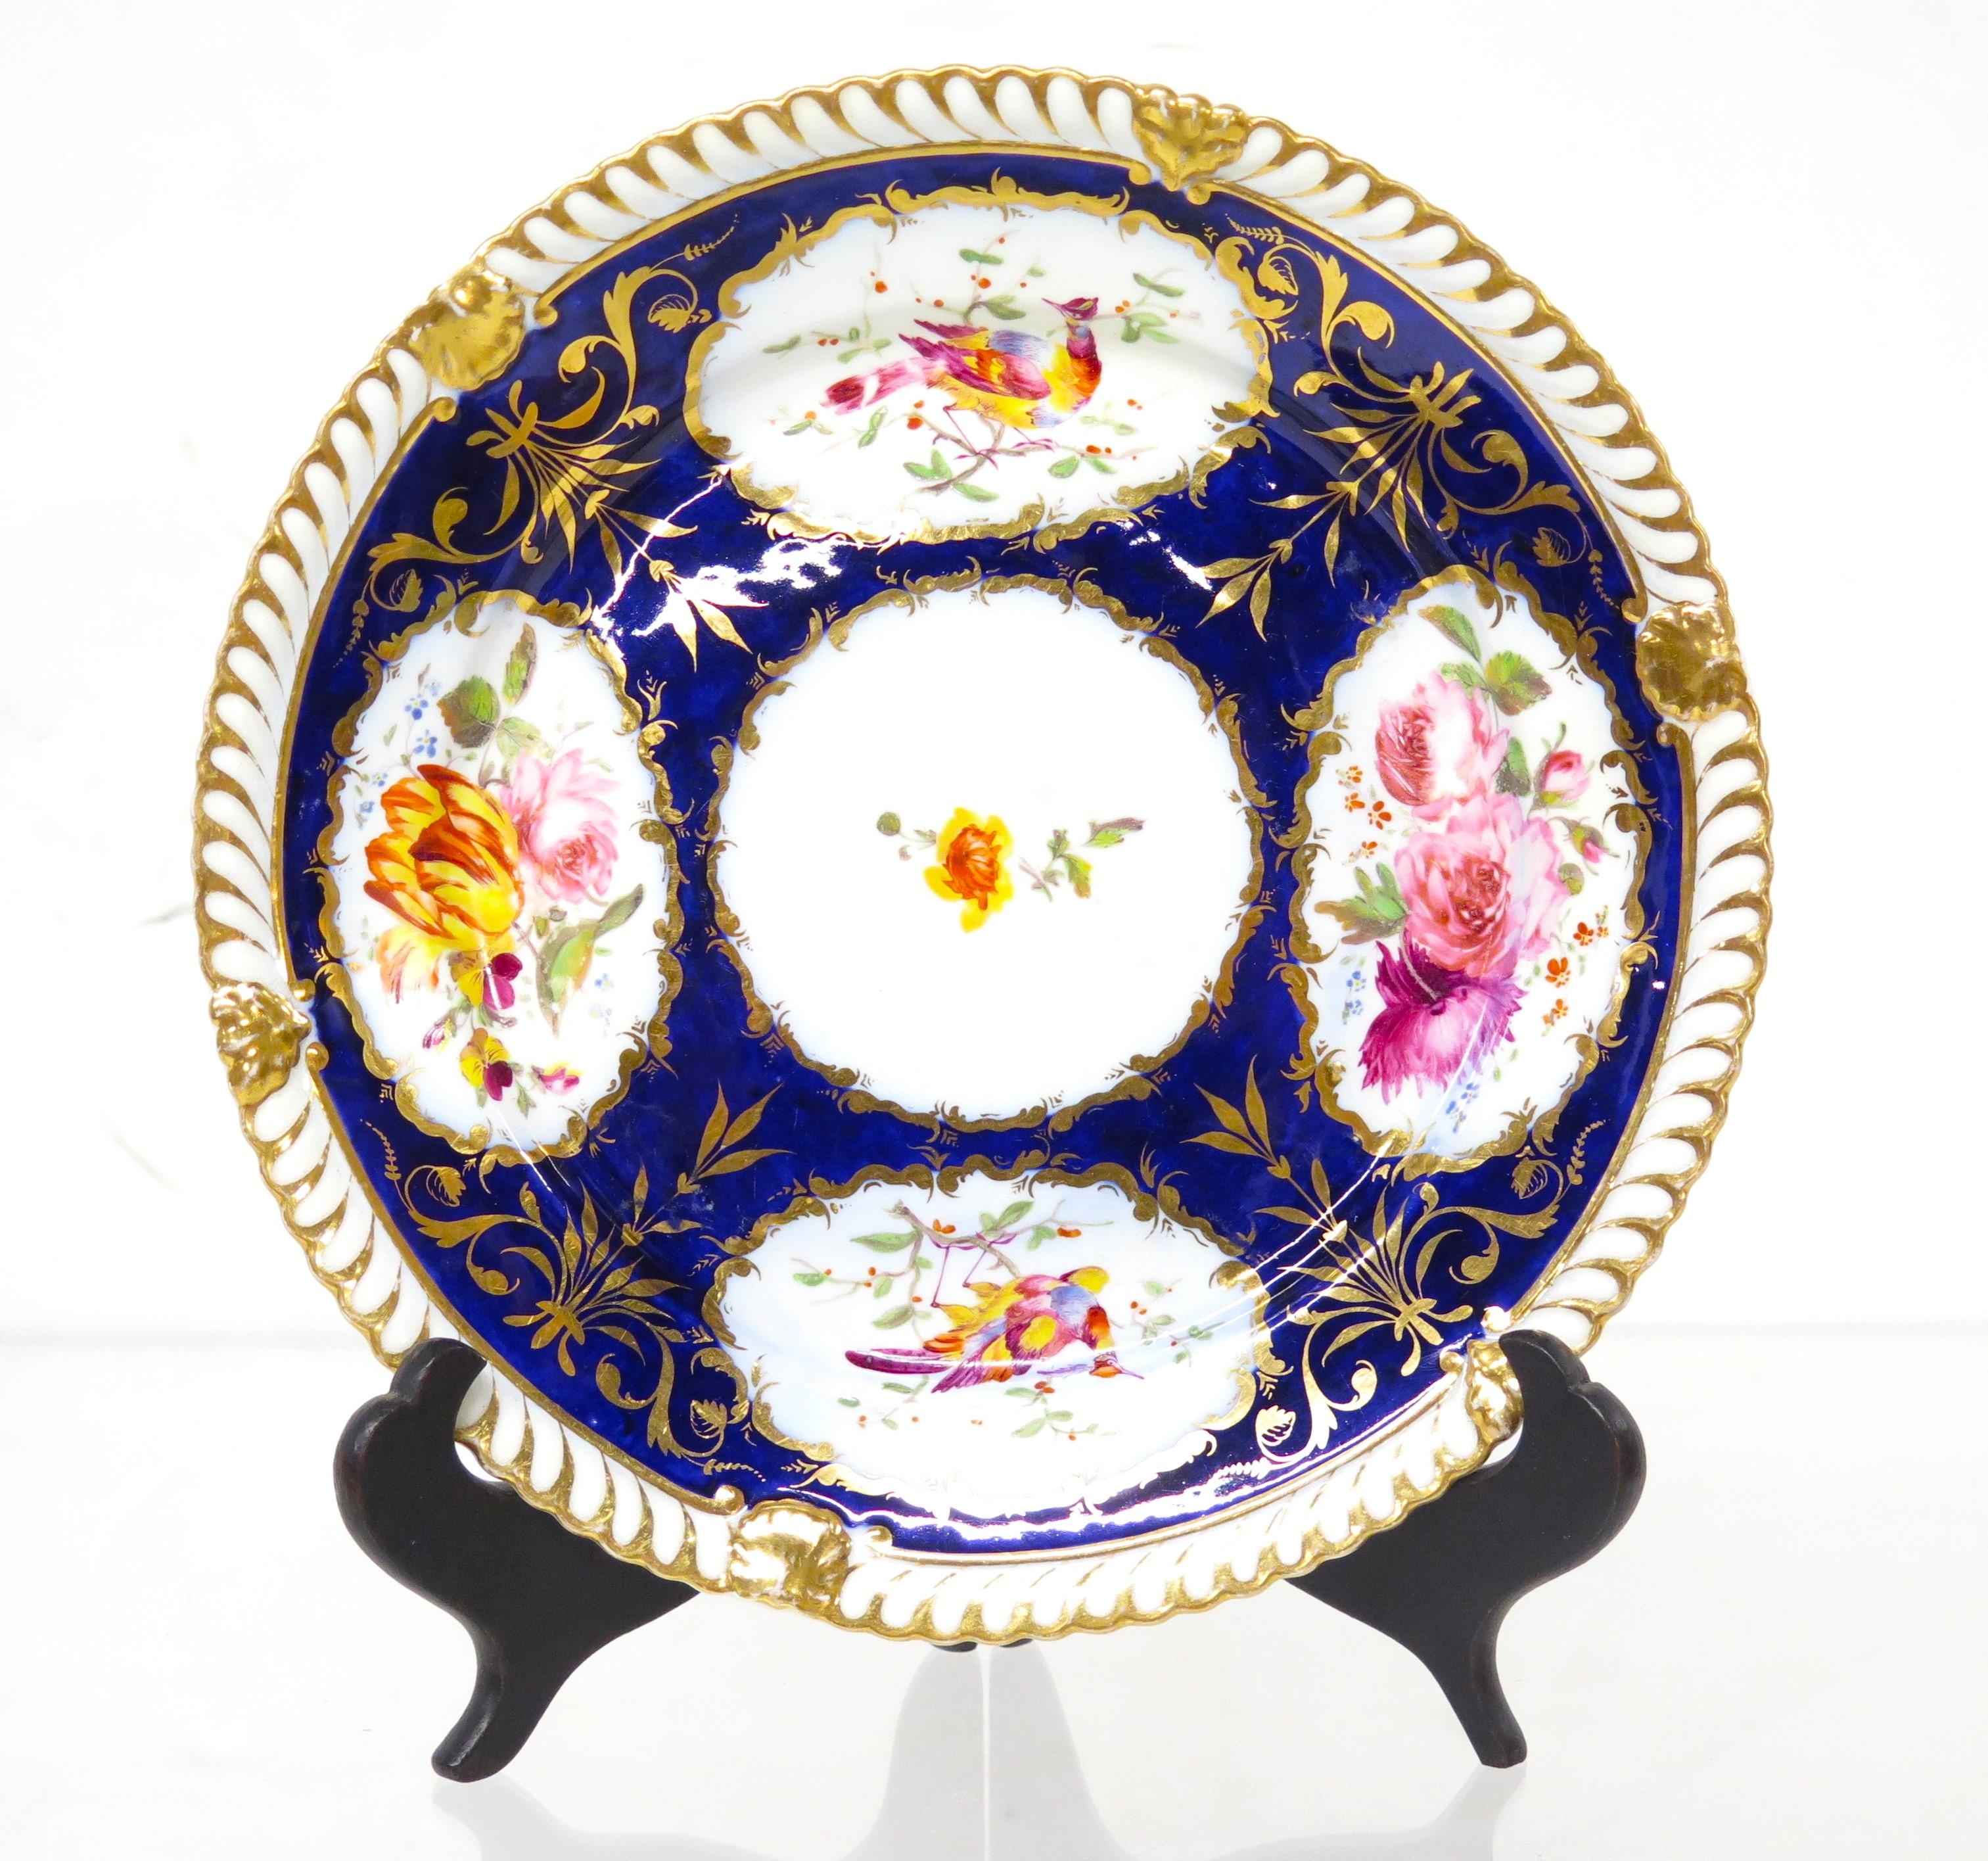 Porcelain A Group of Royal Crown Derby-Style Cobalt & Floral Hand-Painted China For Sale